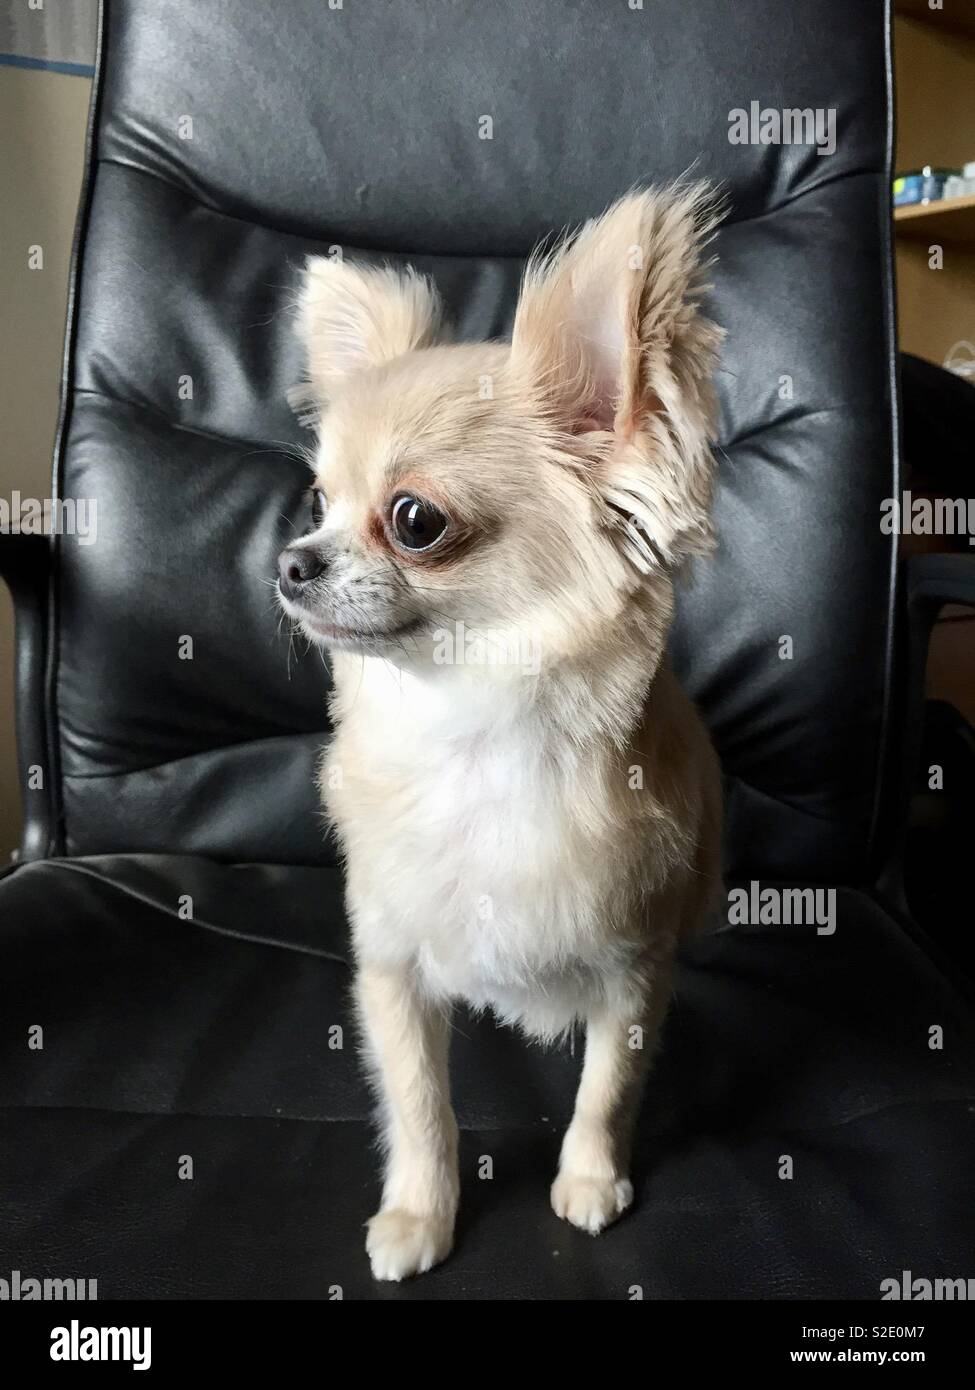 Chihuahua poses on an office chair Stock Photo